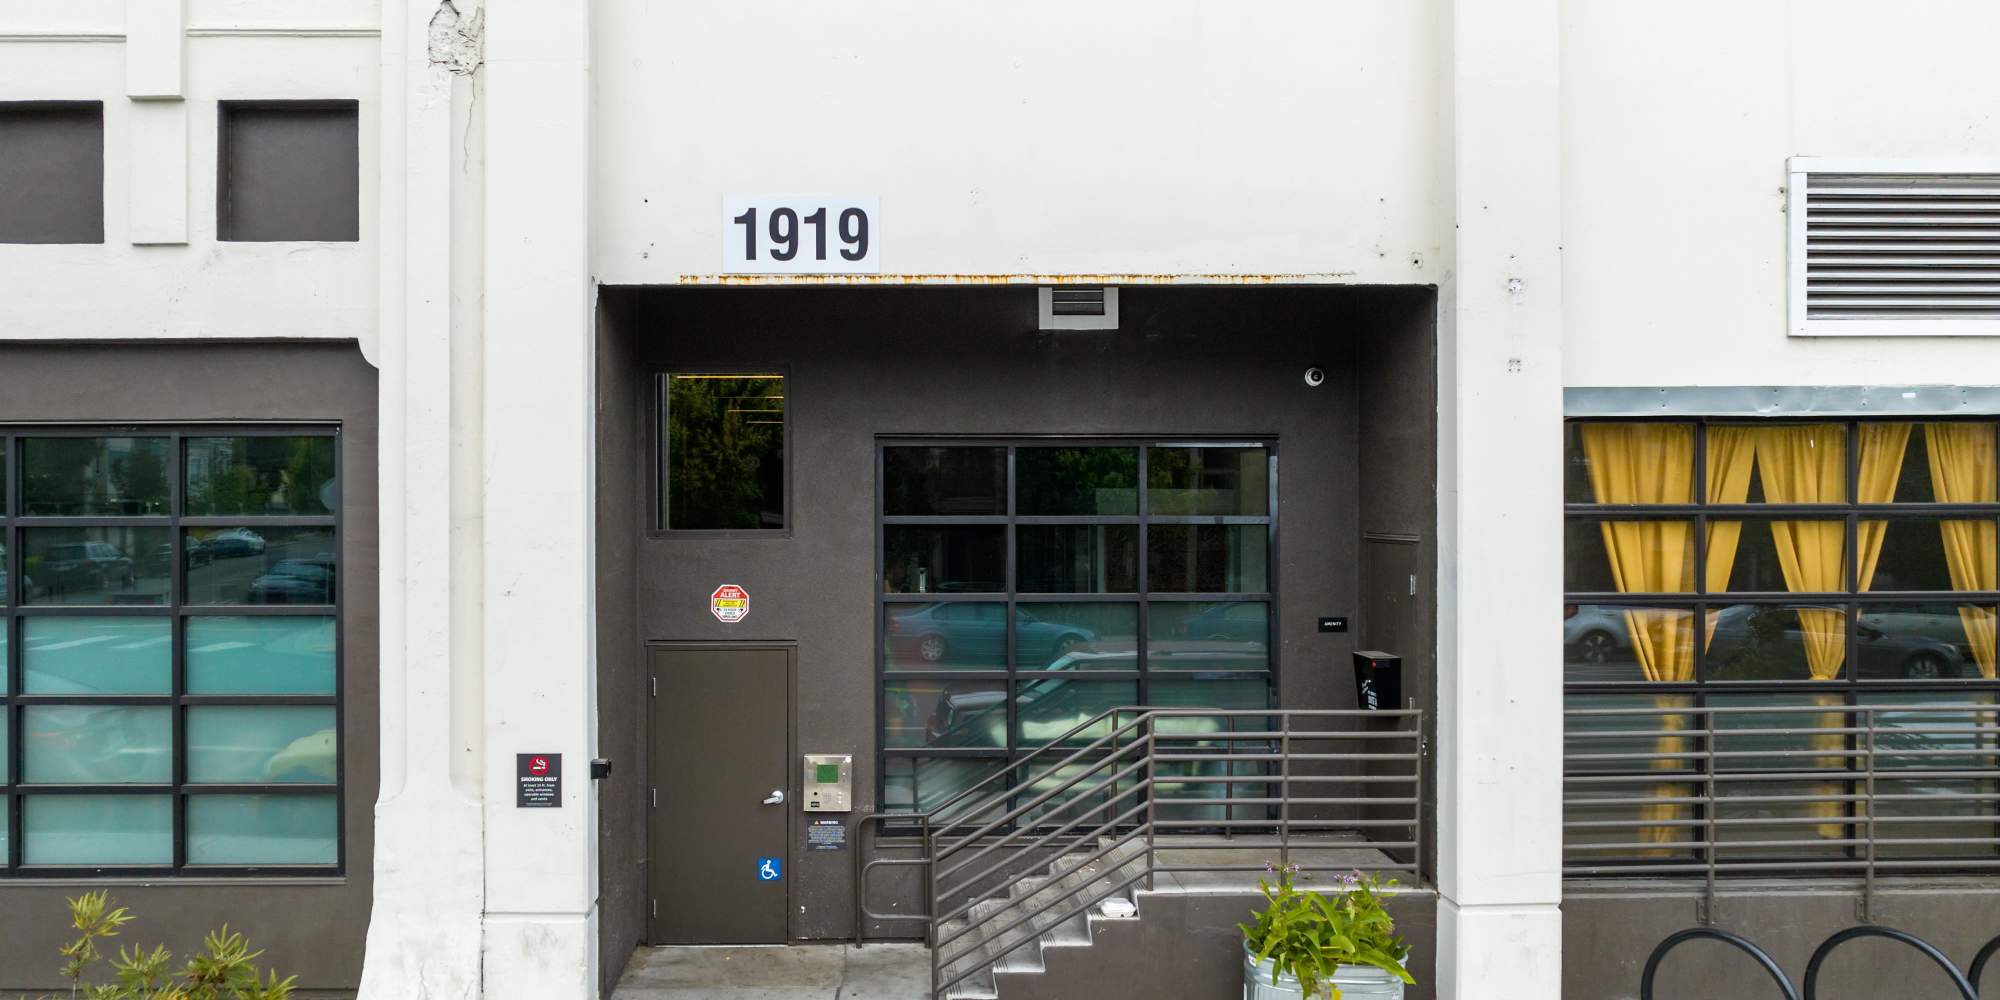 Entrance to the building at 1919 Market Street in Oakland, California